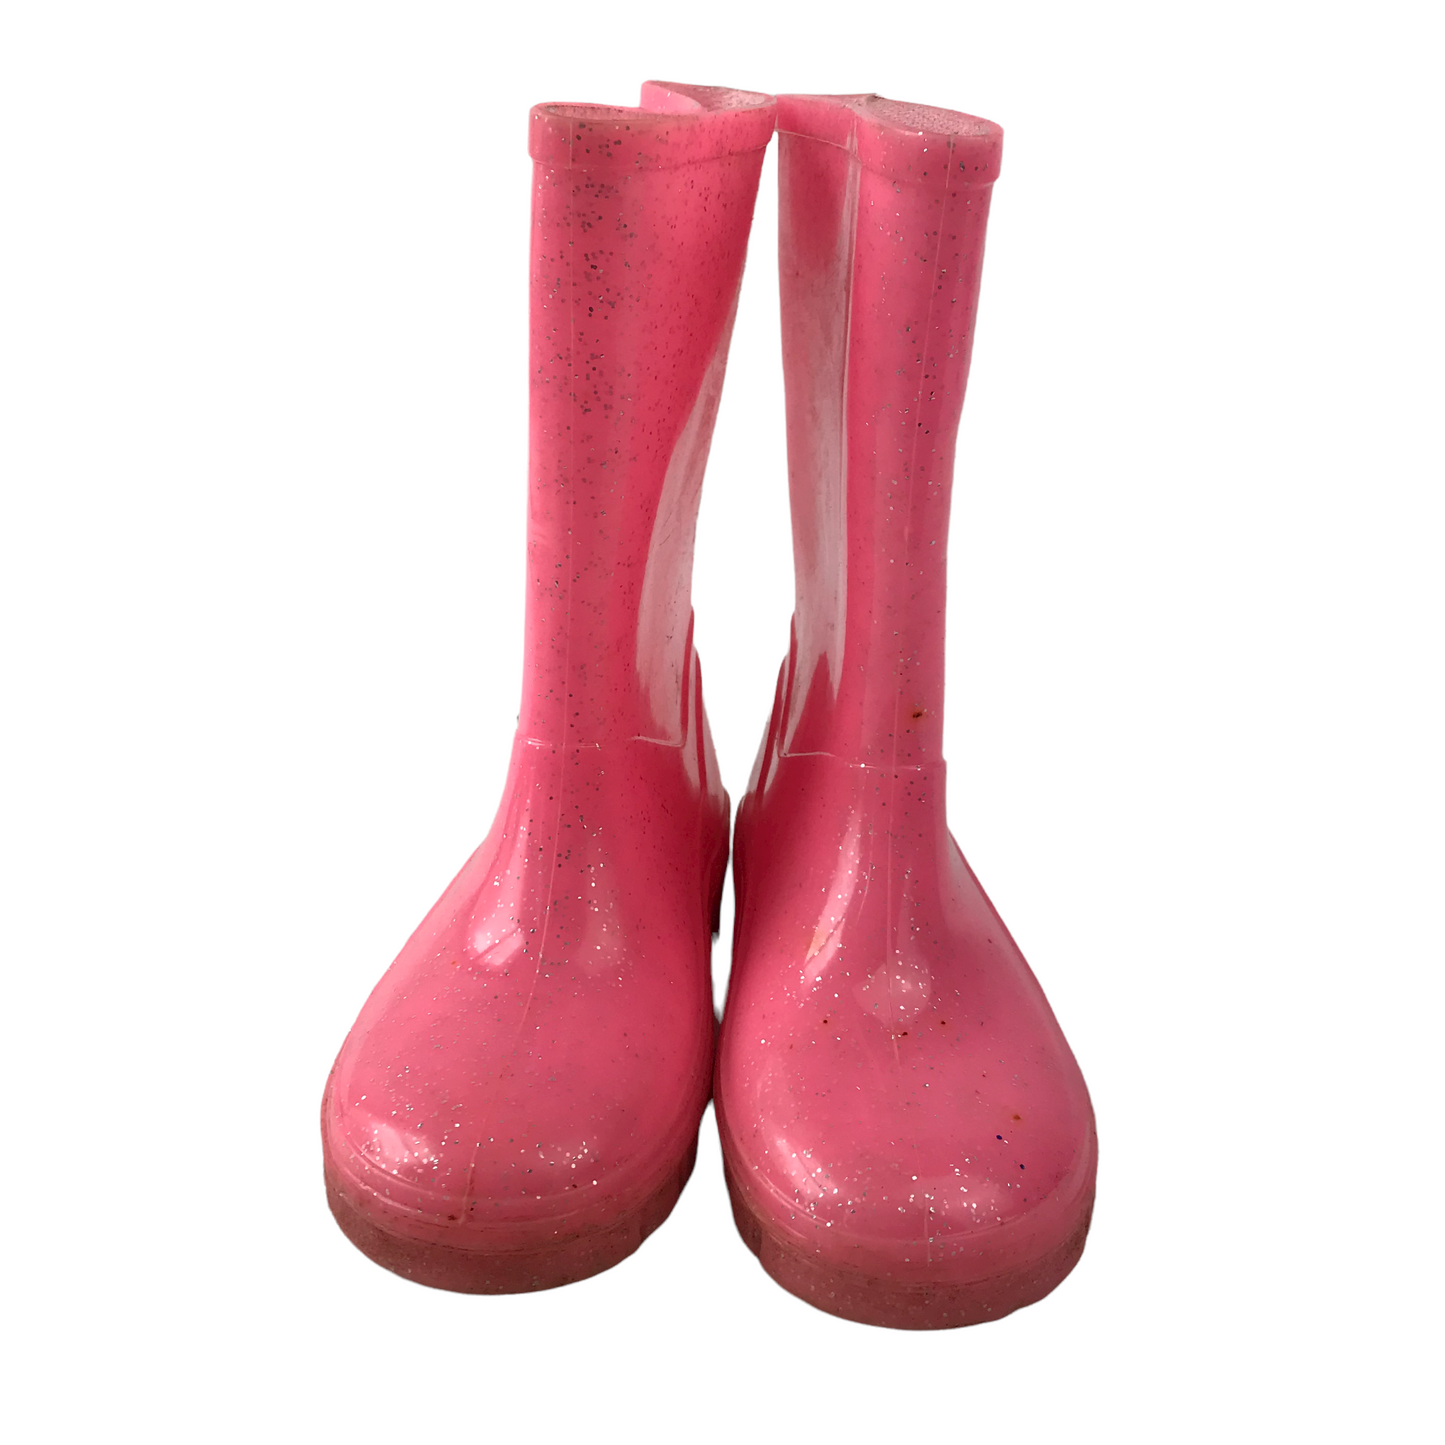 Bright Pink Sparkly Wellies Shoe Size 11 (jr)